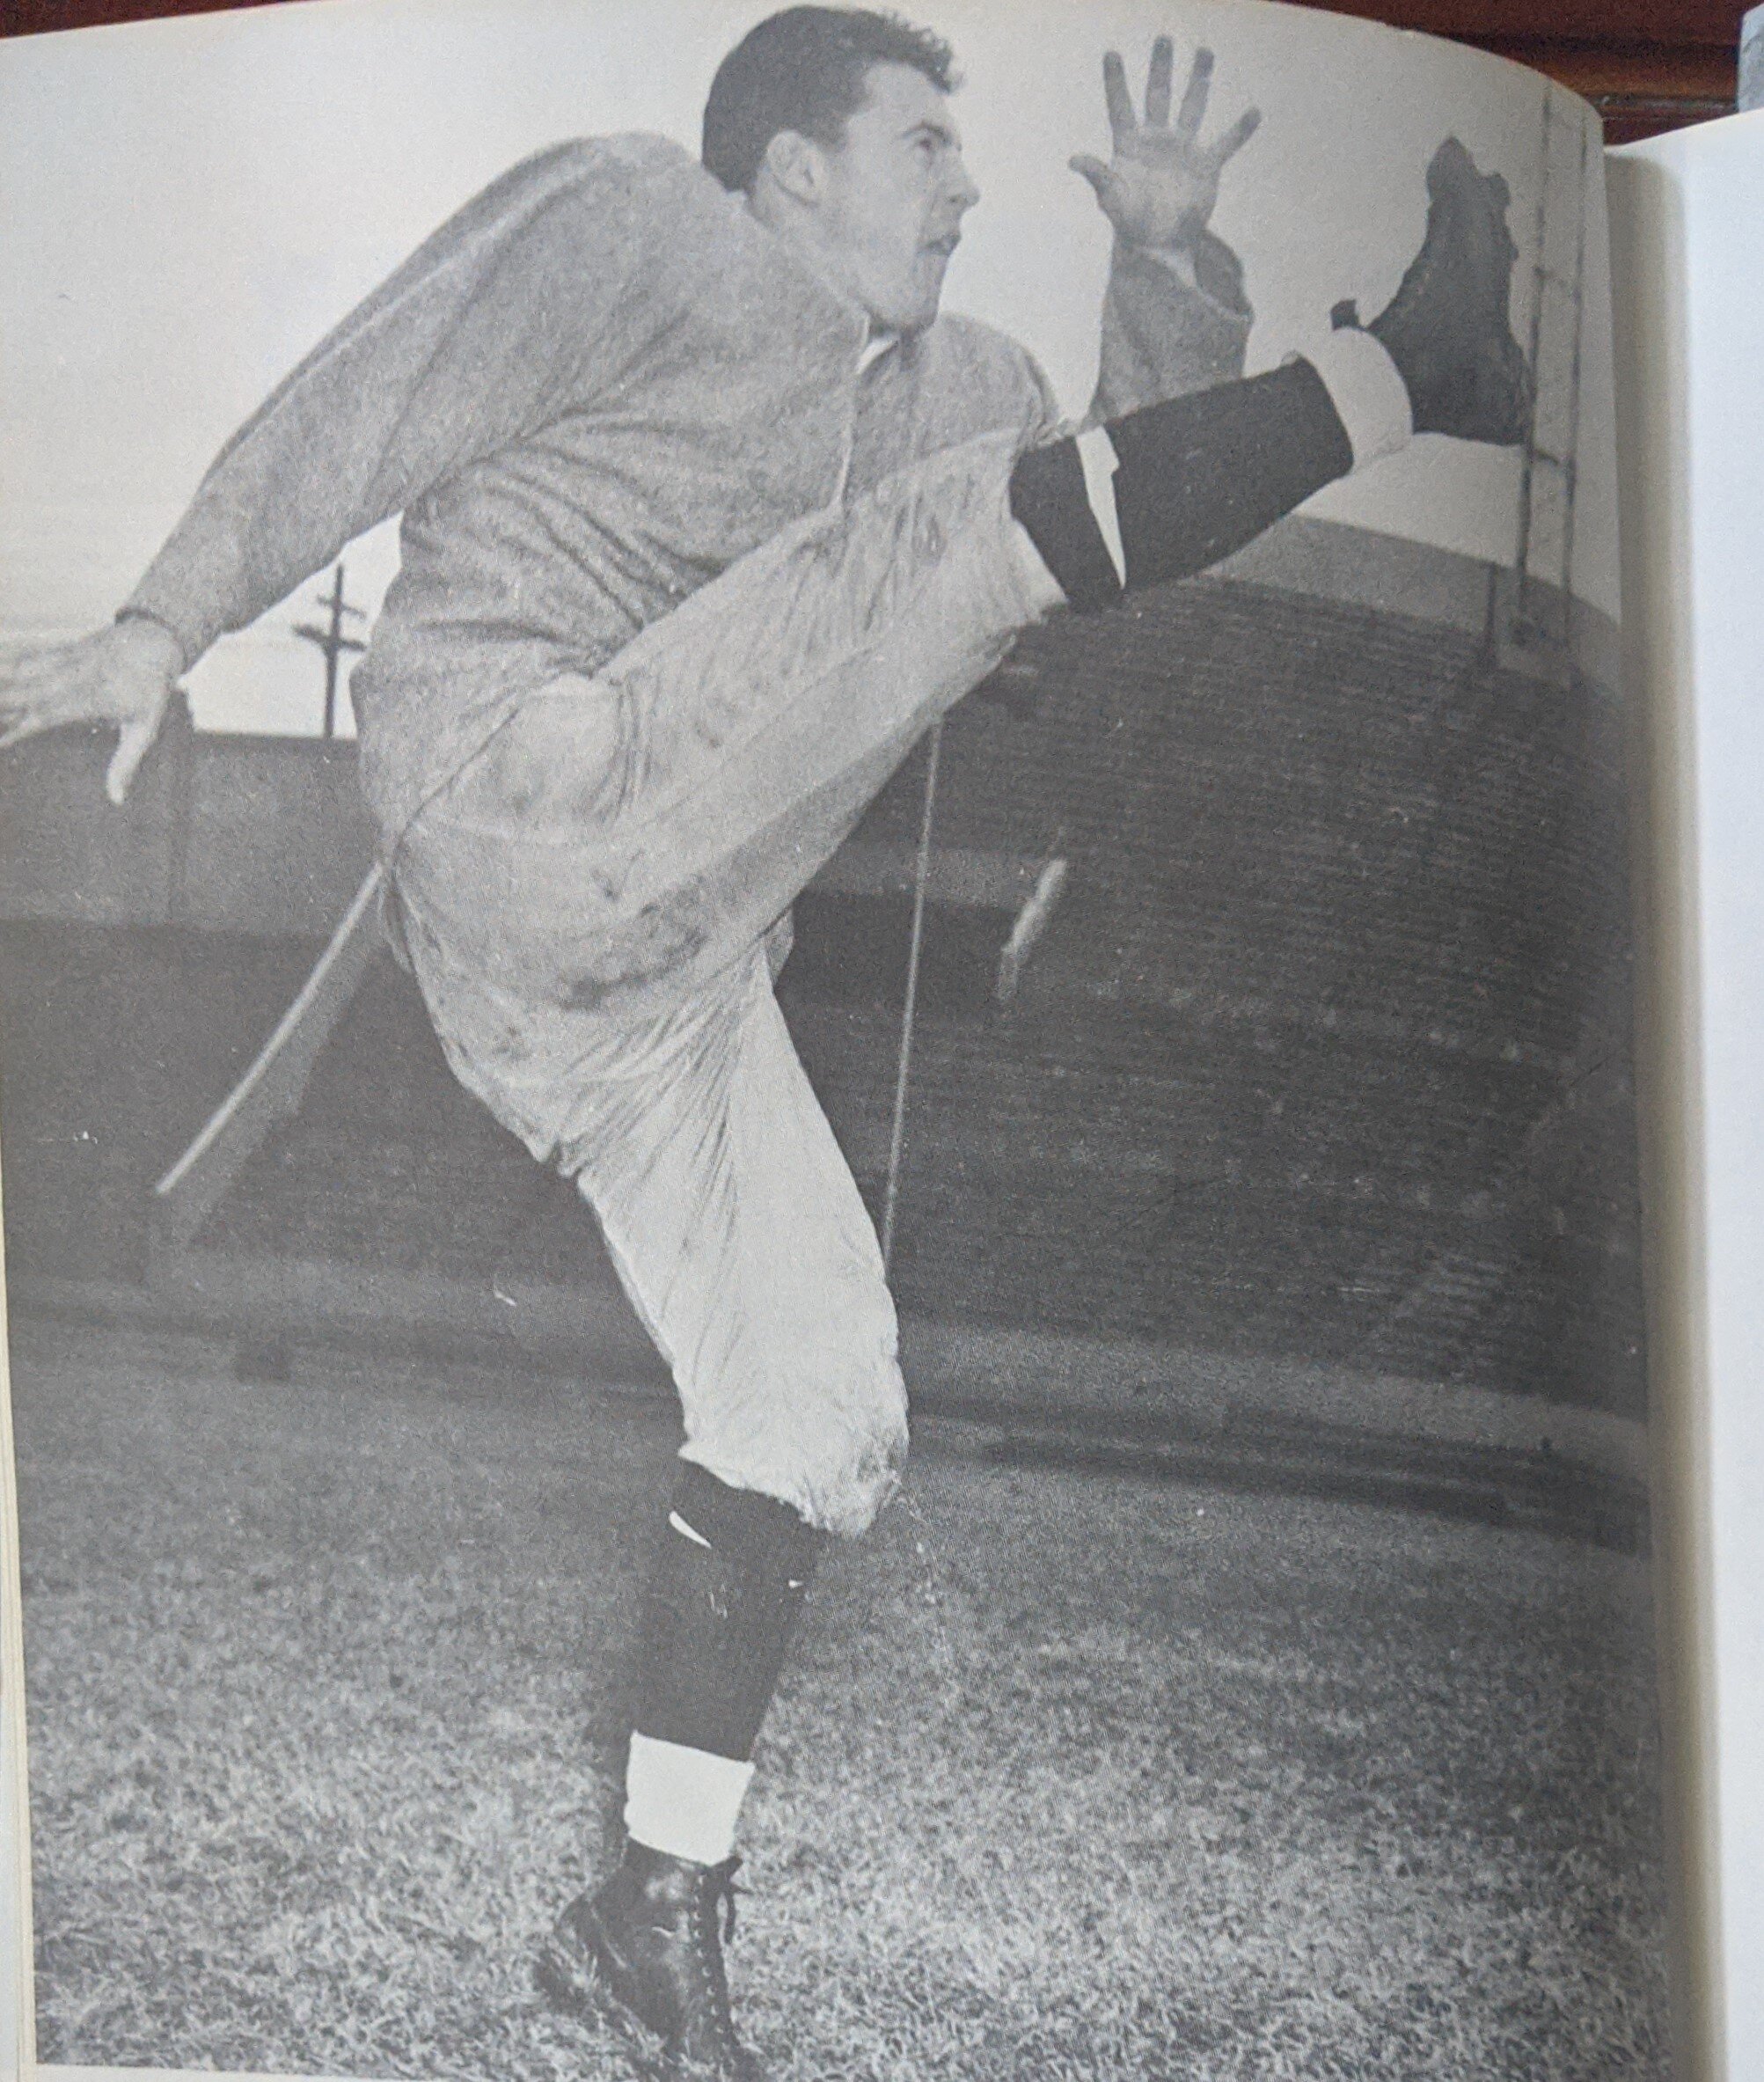 Coach Bible said the Roy Dale McKay was the finest punter in Texas History